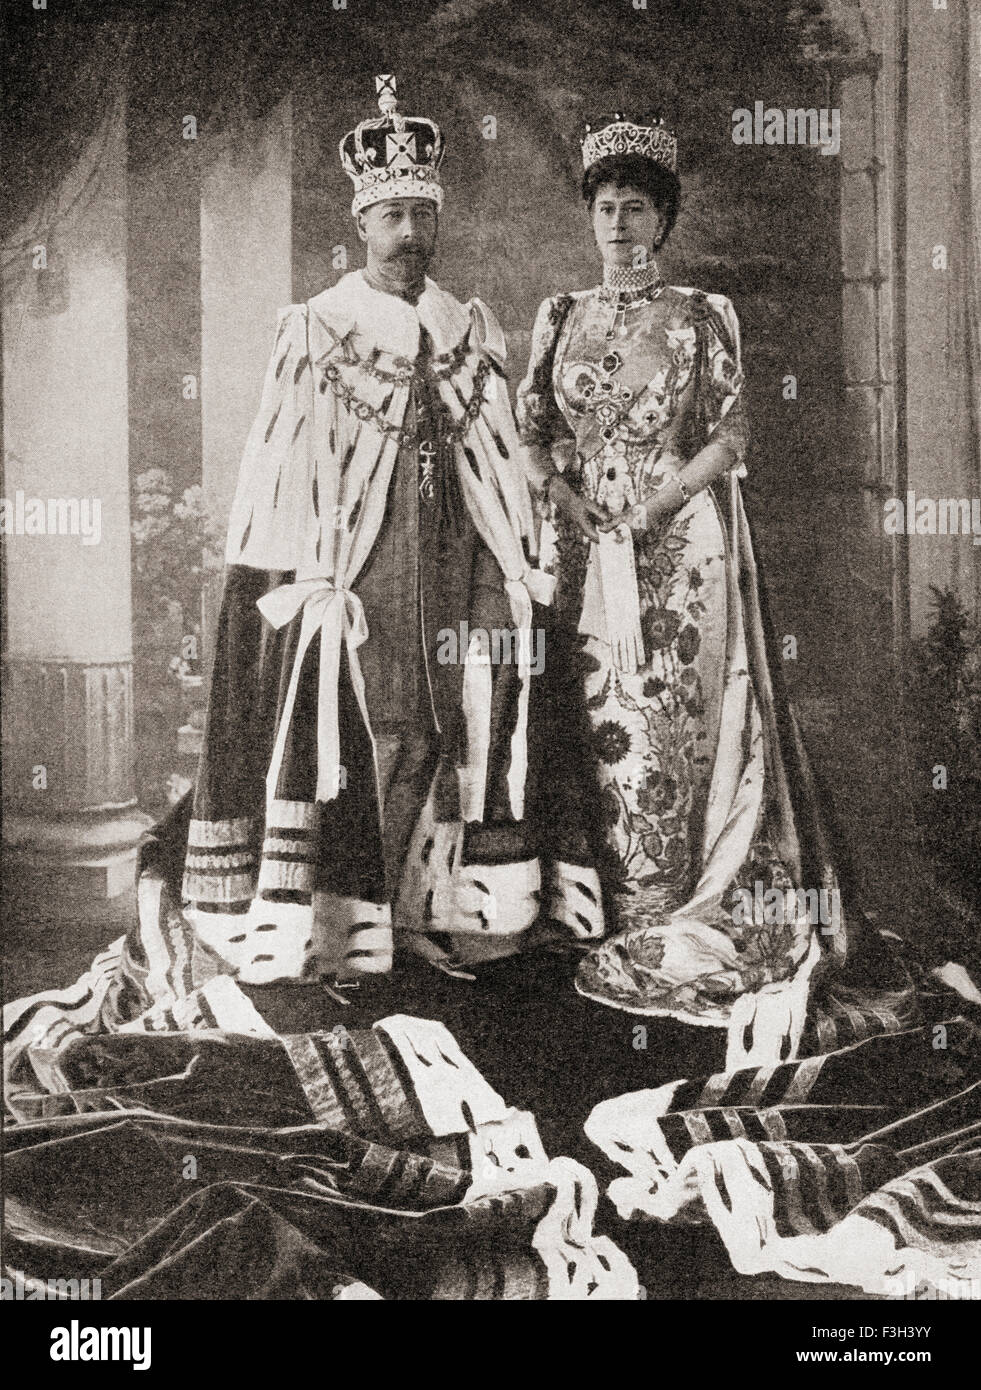 King George V and Queen Mary in their state robes after the coronation ceremony in 1911.  George V,  1865 – 1936.   King of the United Kingdom and the British Dominions,  and Emperor of India, 1910 - 1936.  Mary of Teck, 1867 – 1953.  Queen consort of the United Kingdom and the British Dominions, and Empress consort of India. Stock Photo